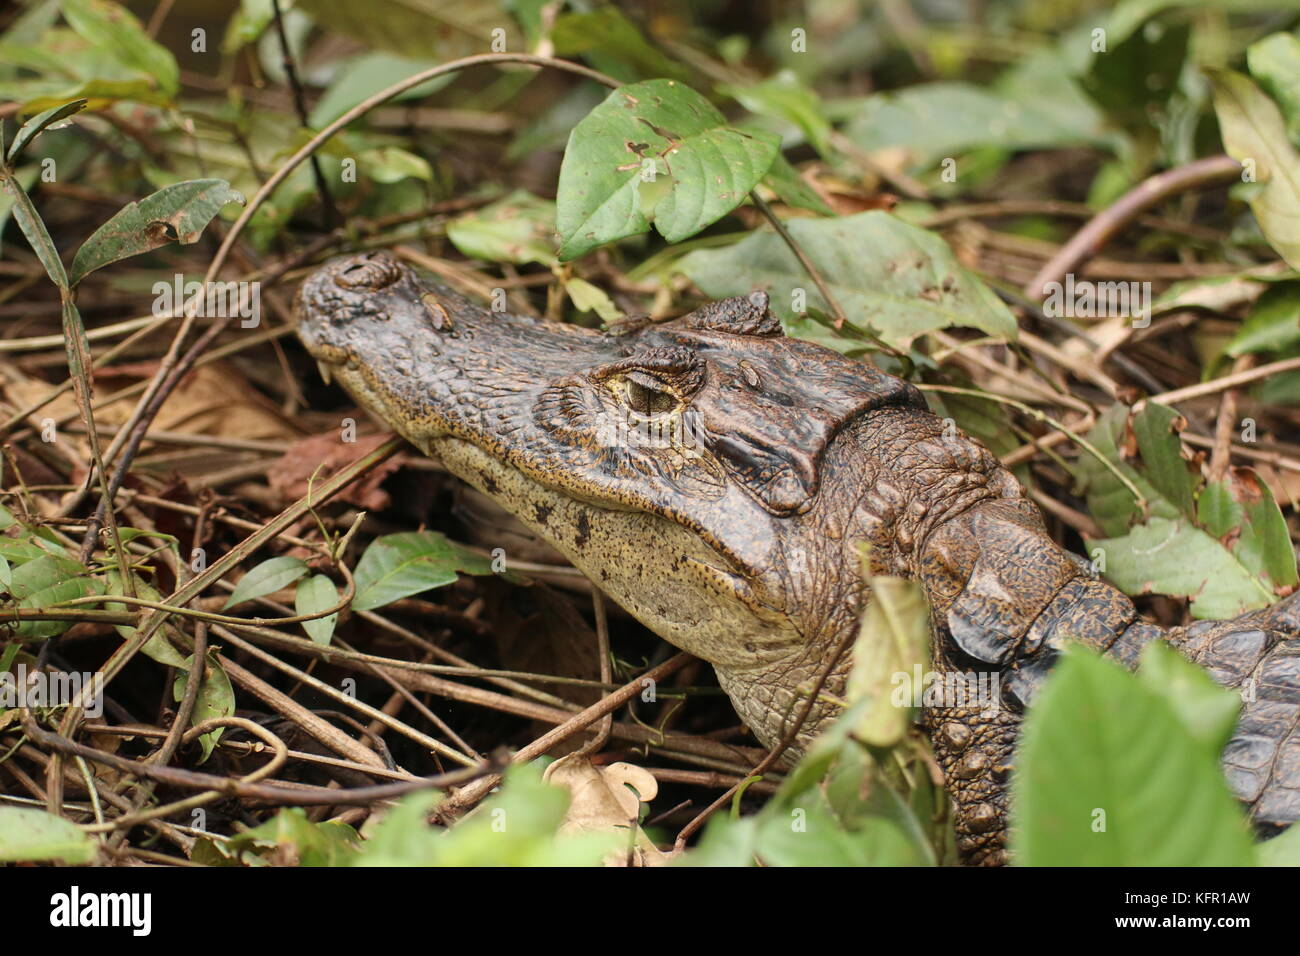 A young caiman (caiman cocodrilus) hiding in the Costa Rican rainforest. Stock Photo